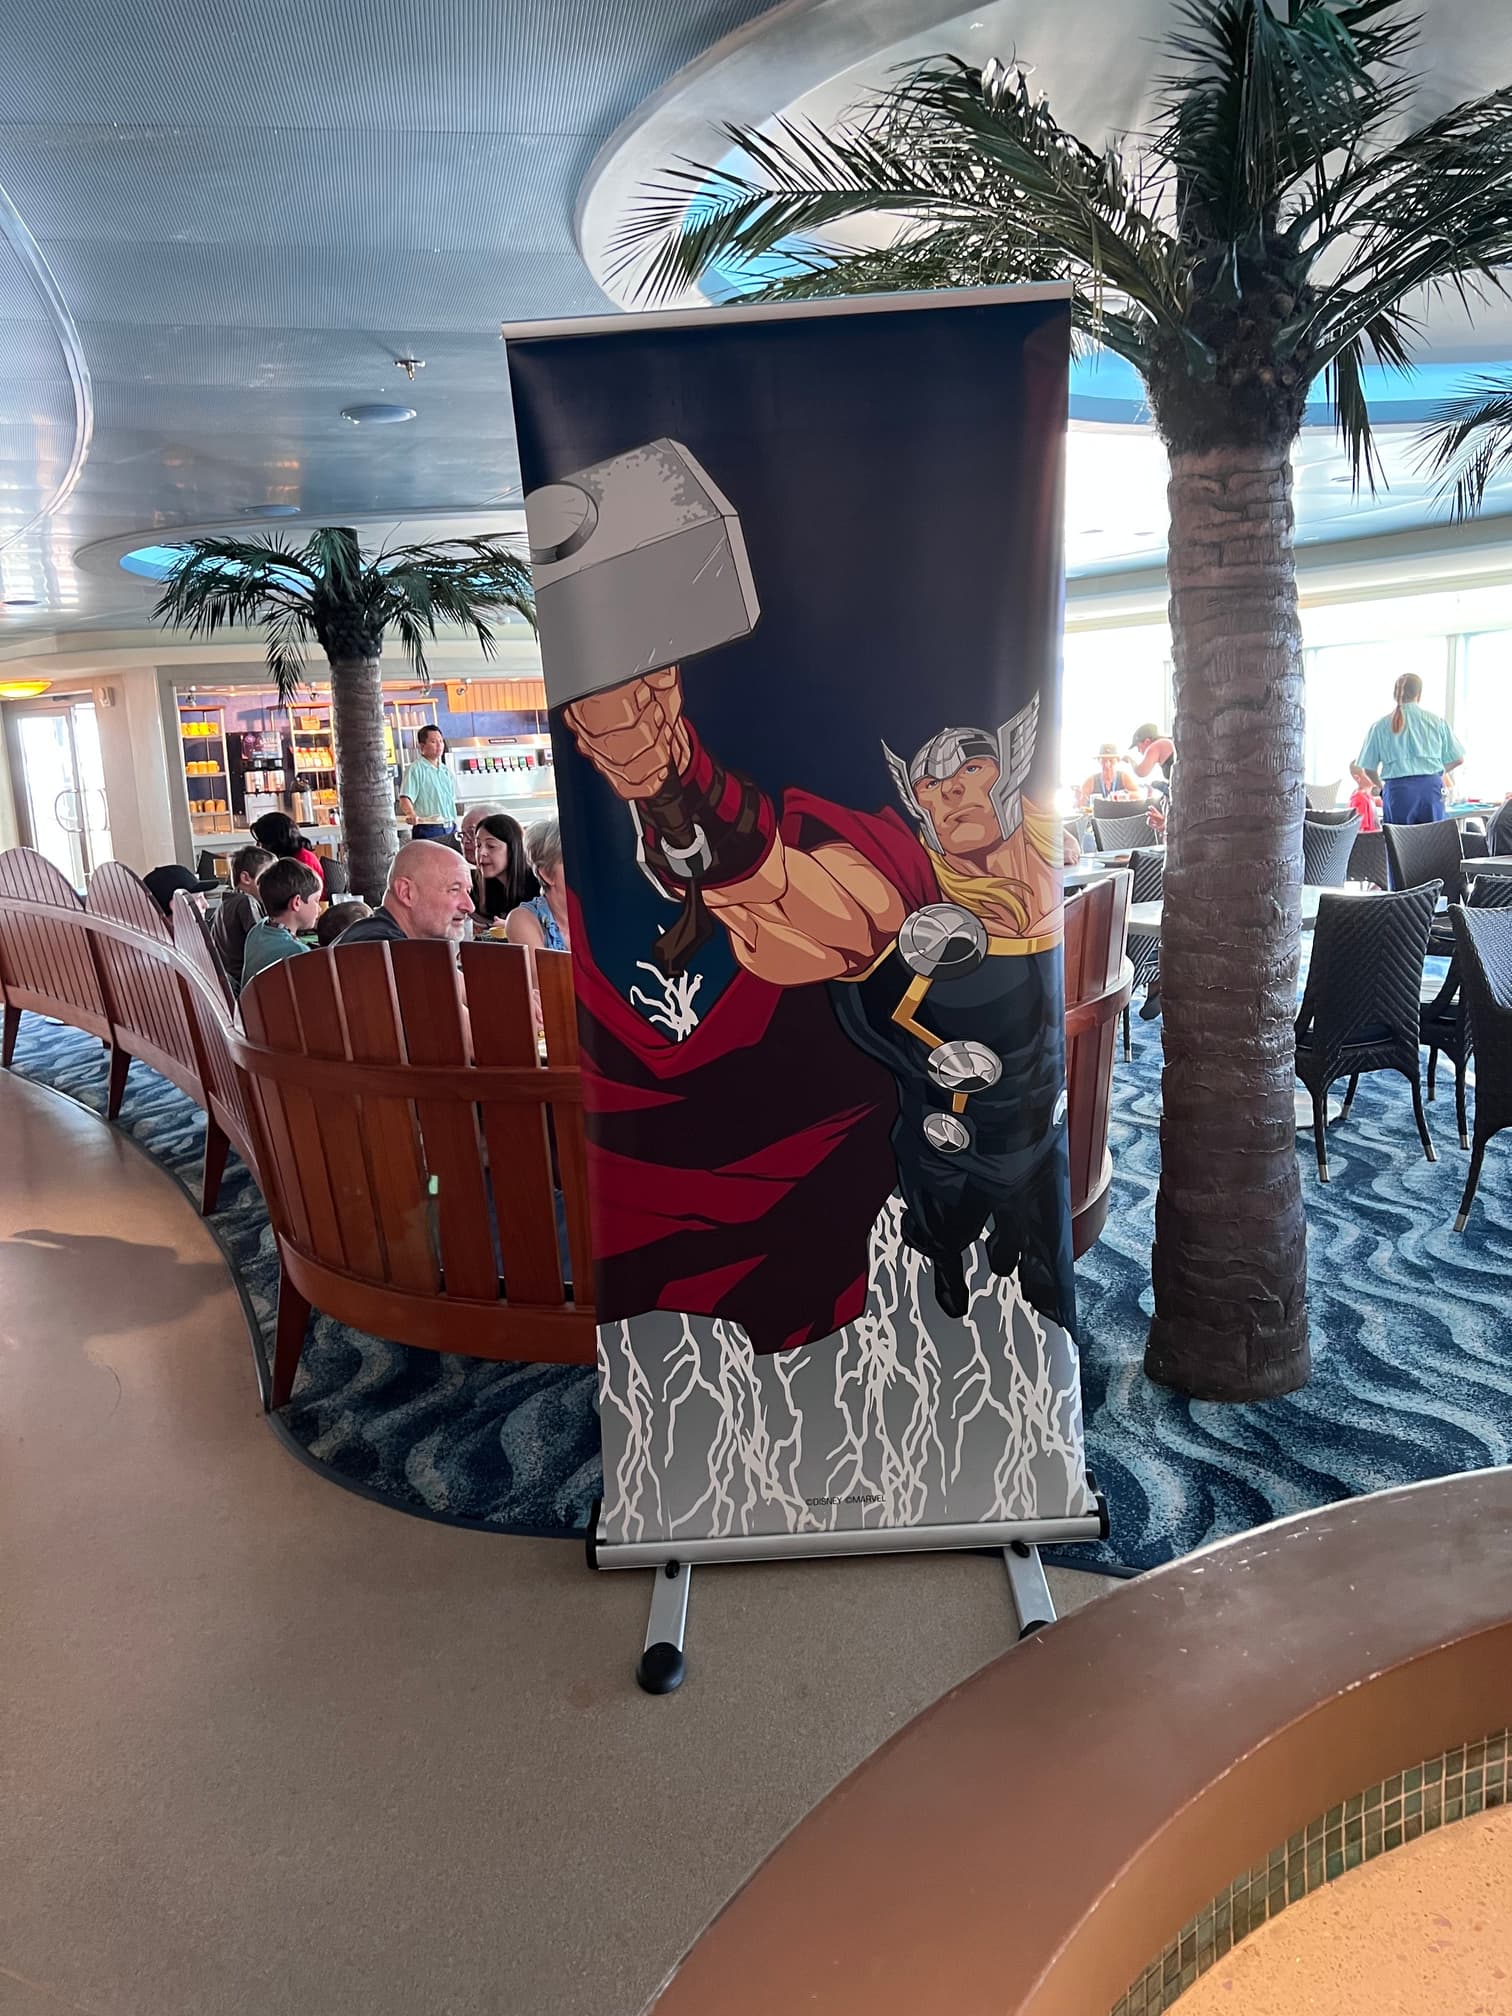 marvel day at sea